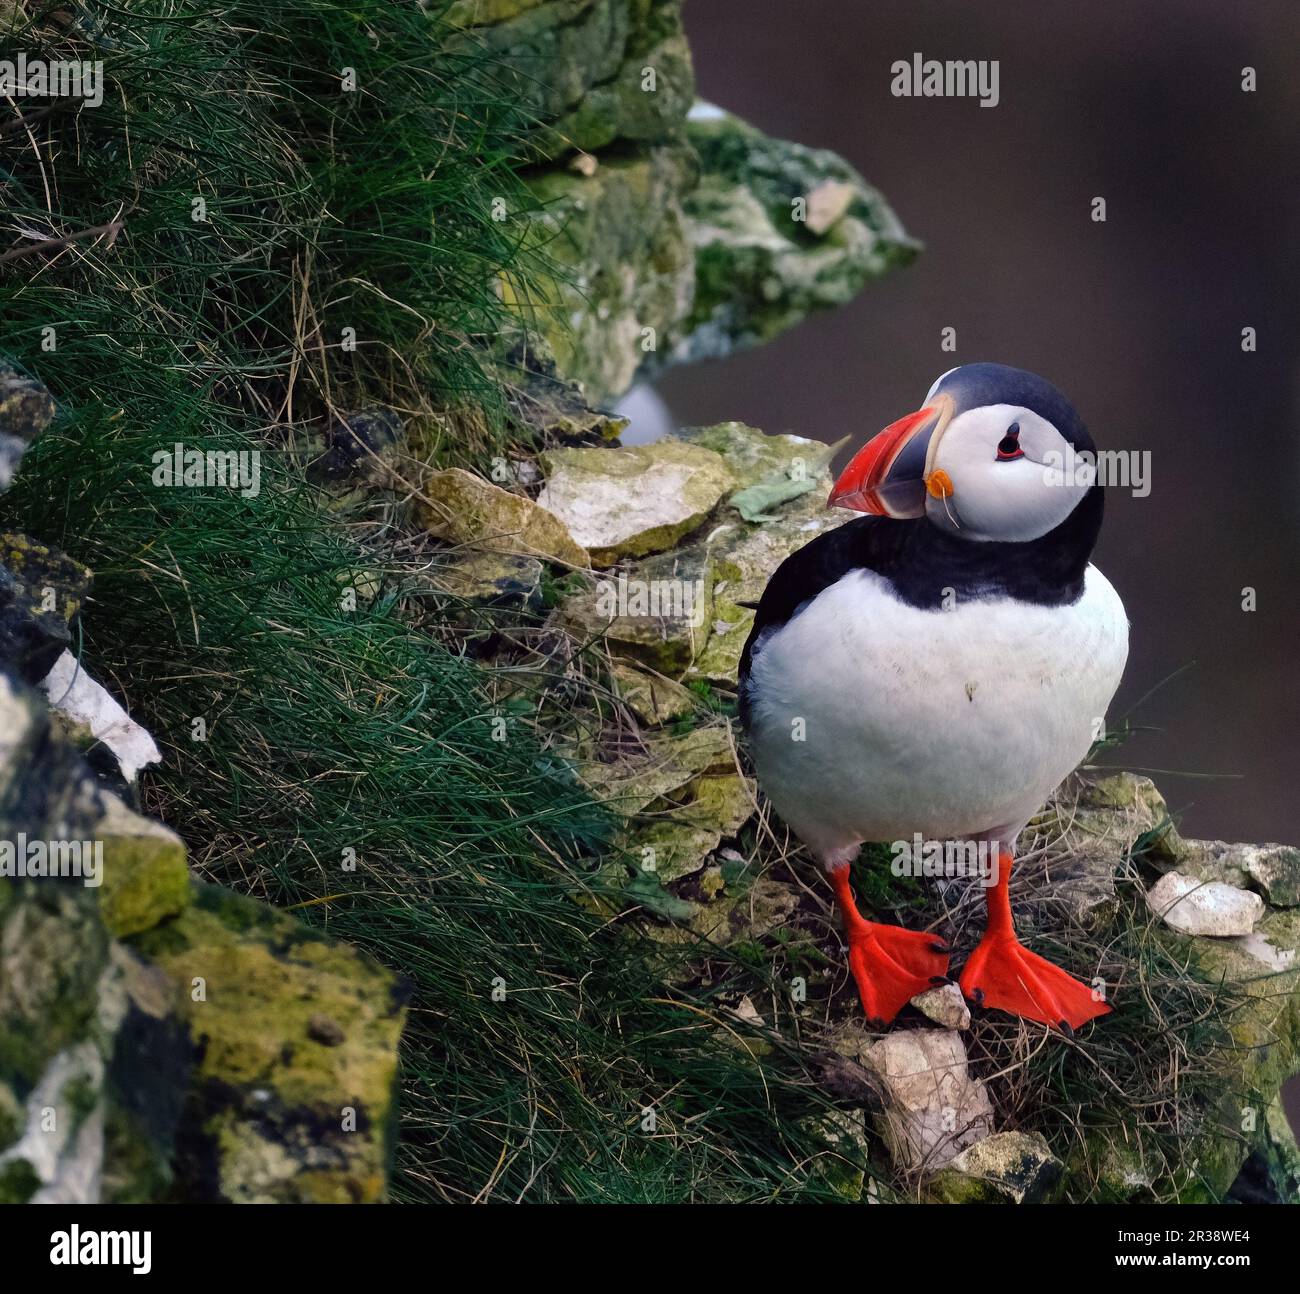 Puffins are any of three species of small alcids in the bird genus Fratercula. These are pelagic seabirds that feed primarily by diving in the water Stock Photo